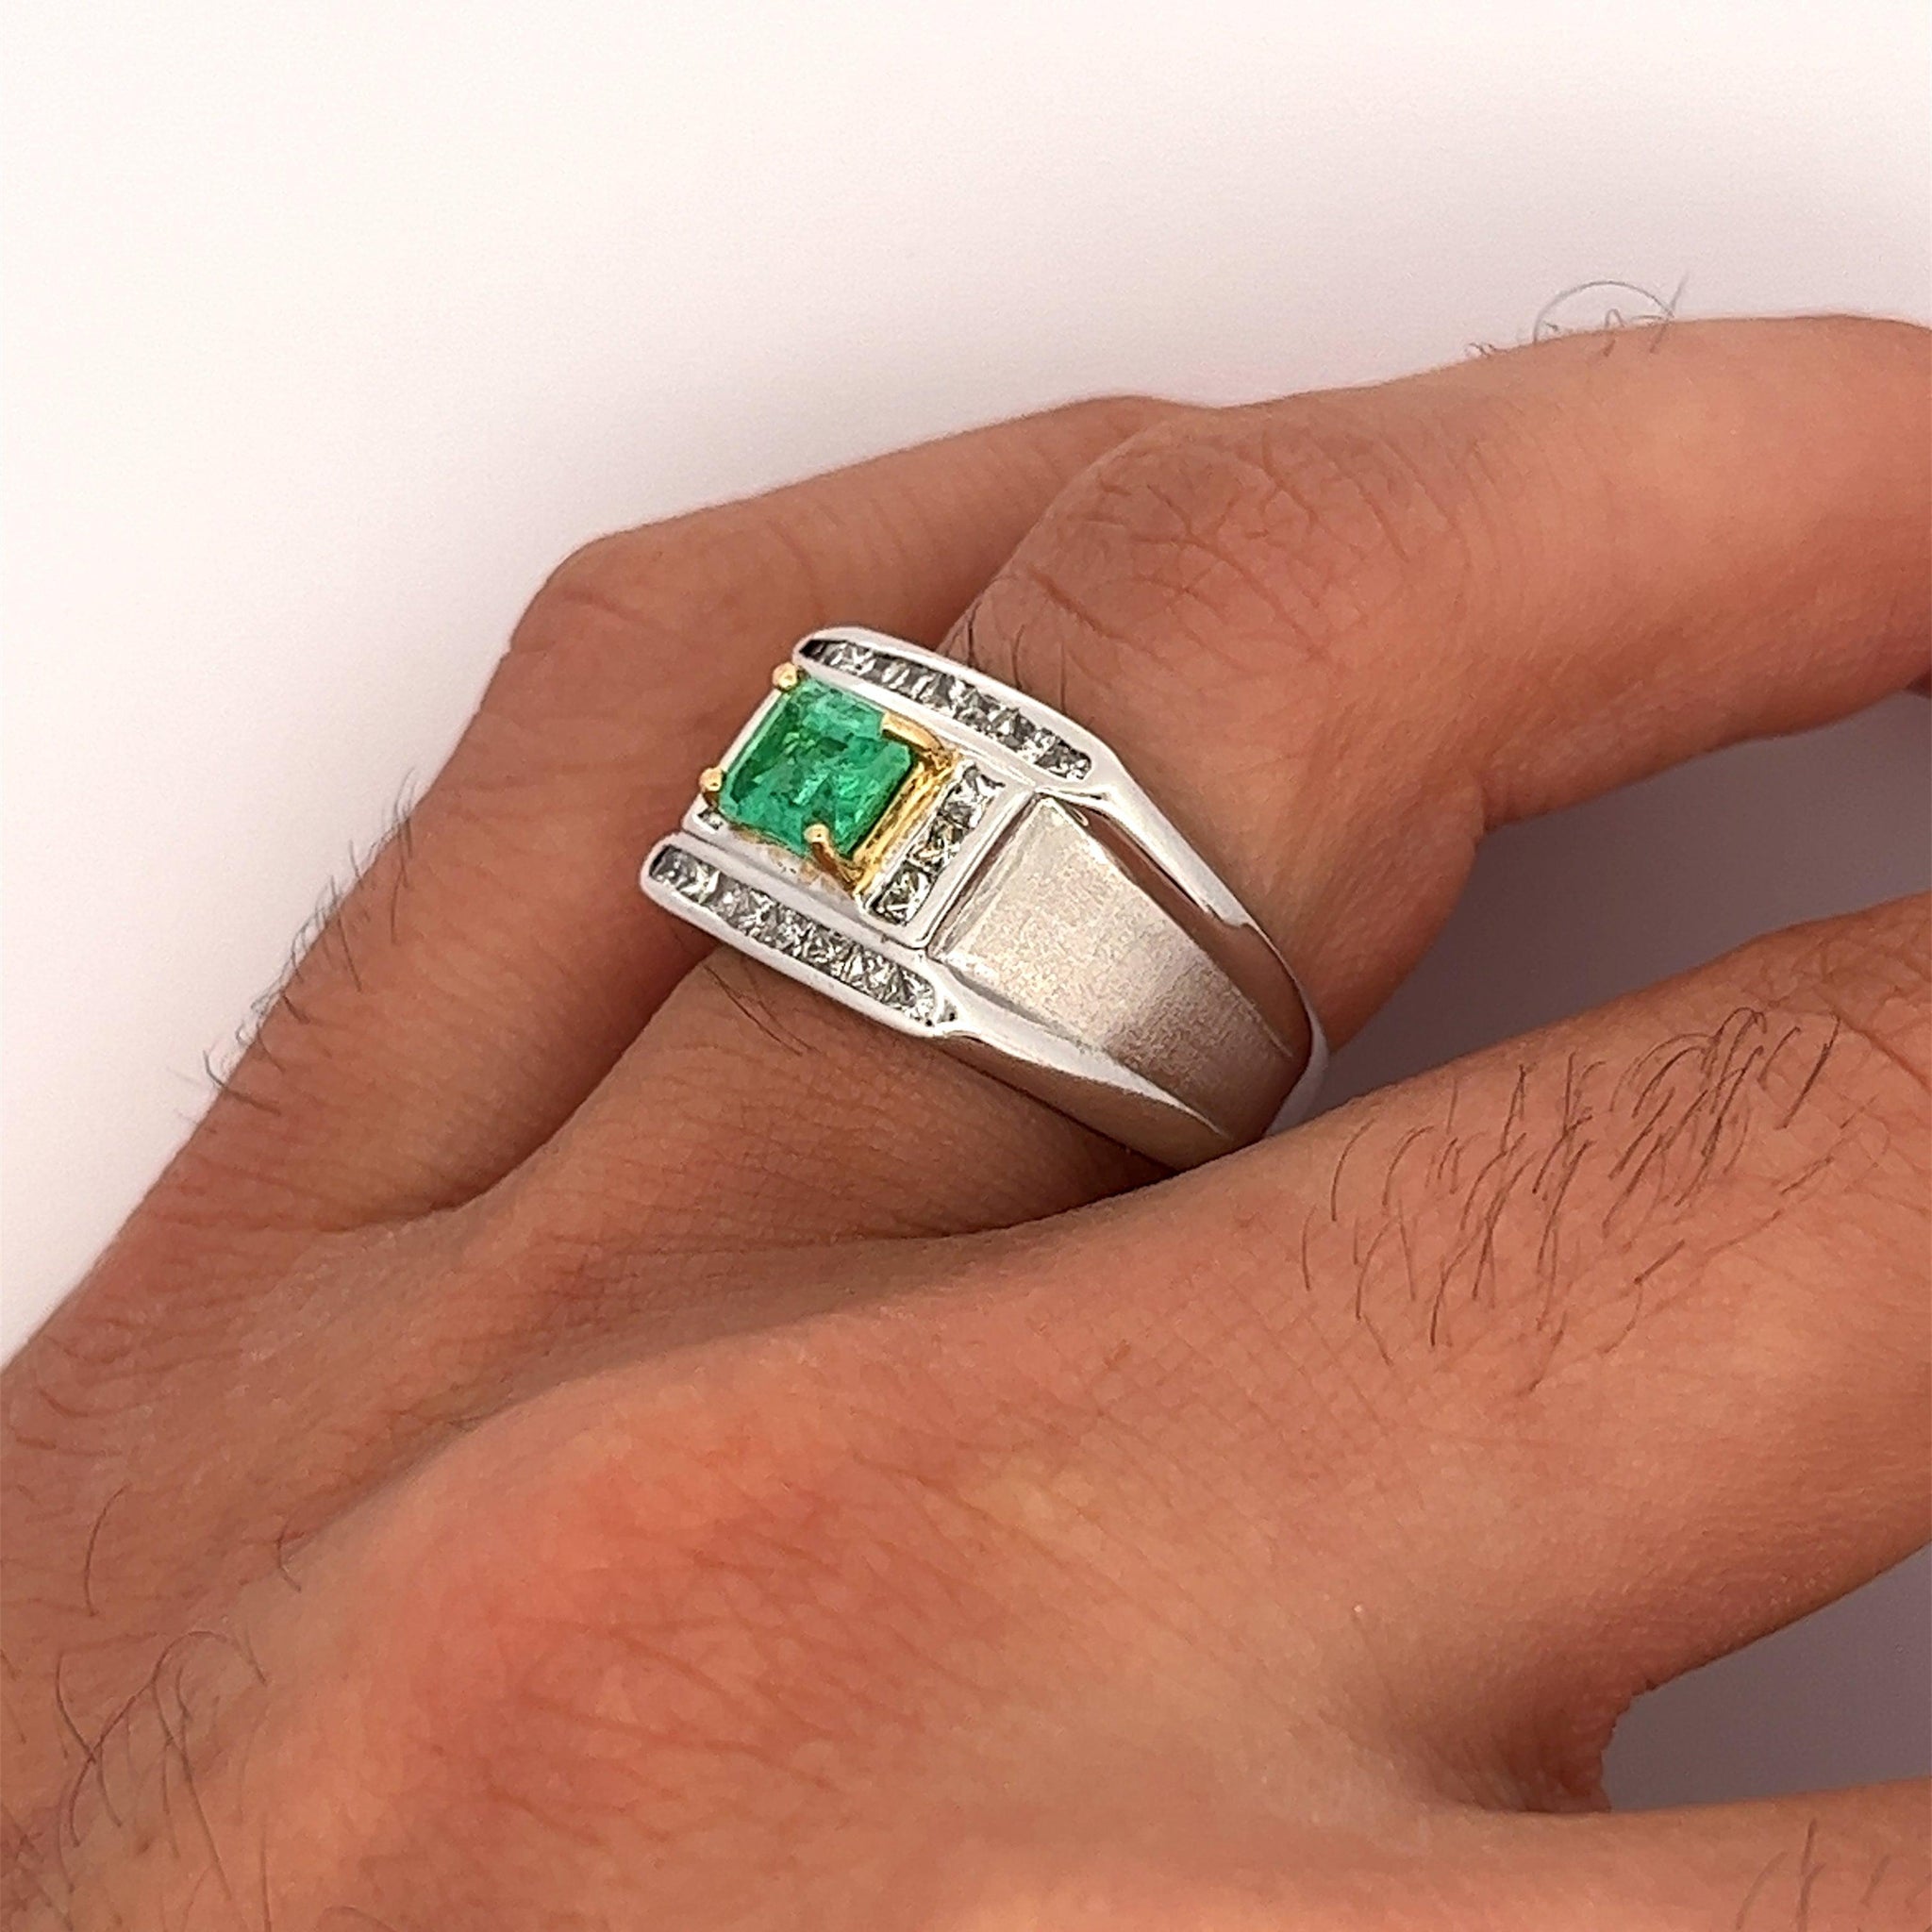 Buy AKSHITA GEMS 6.00 Ratti Natural Emerald Ring (Natural Panna/Panna stone  Silver Plated) Original AAA Quality Gemstone Adjustable Ring Astrological  Purpose For Men Women By Lab Certified at Amazon.in